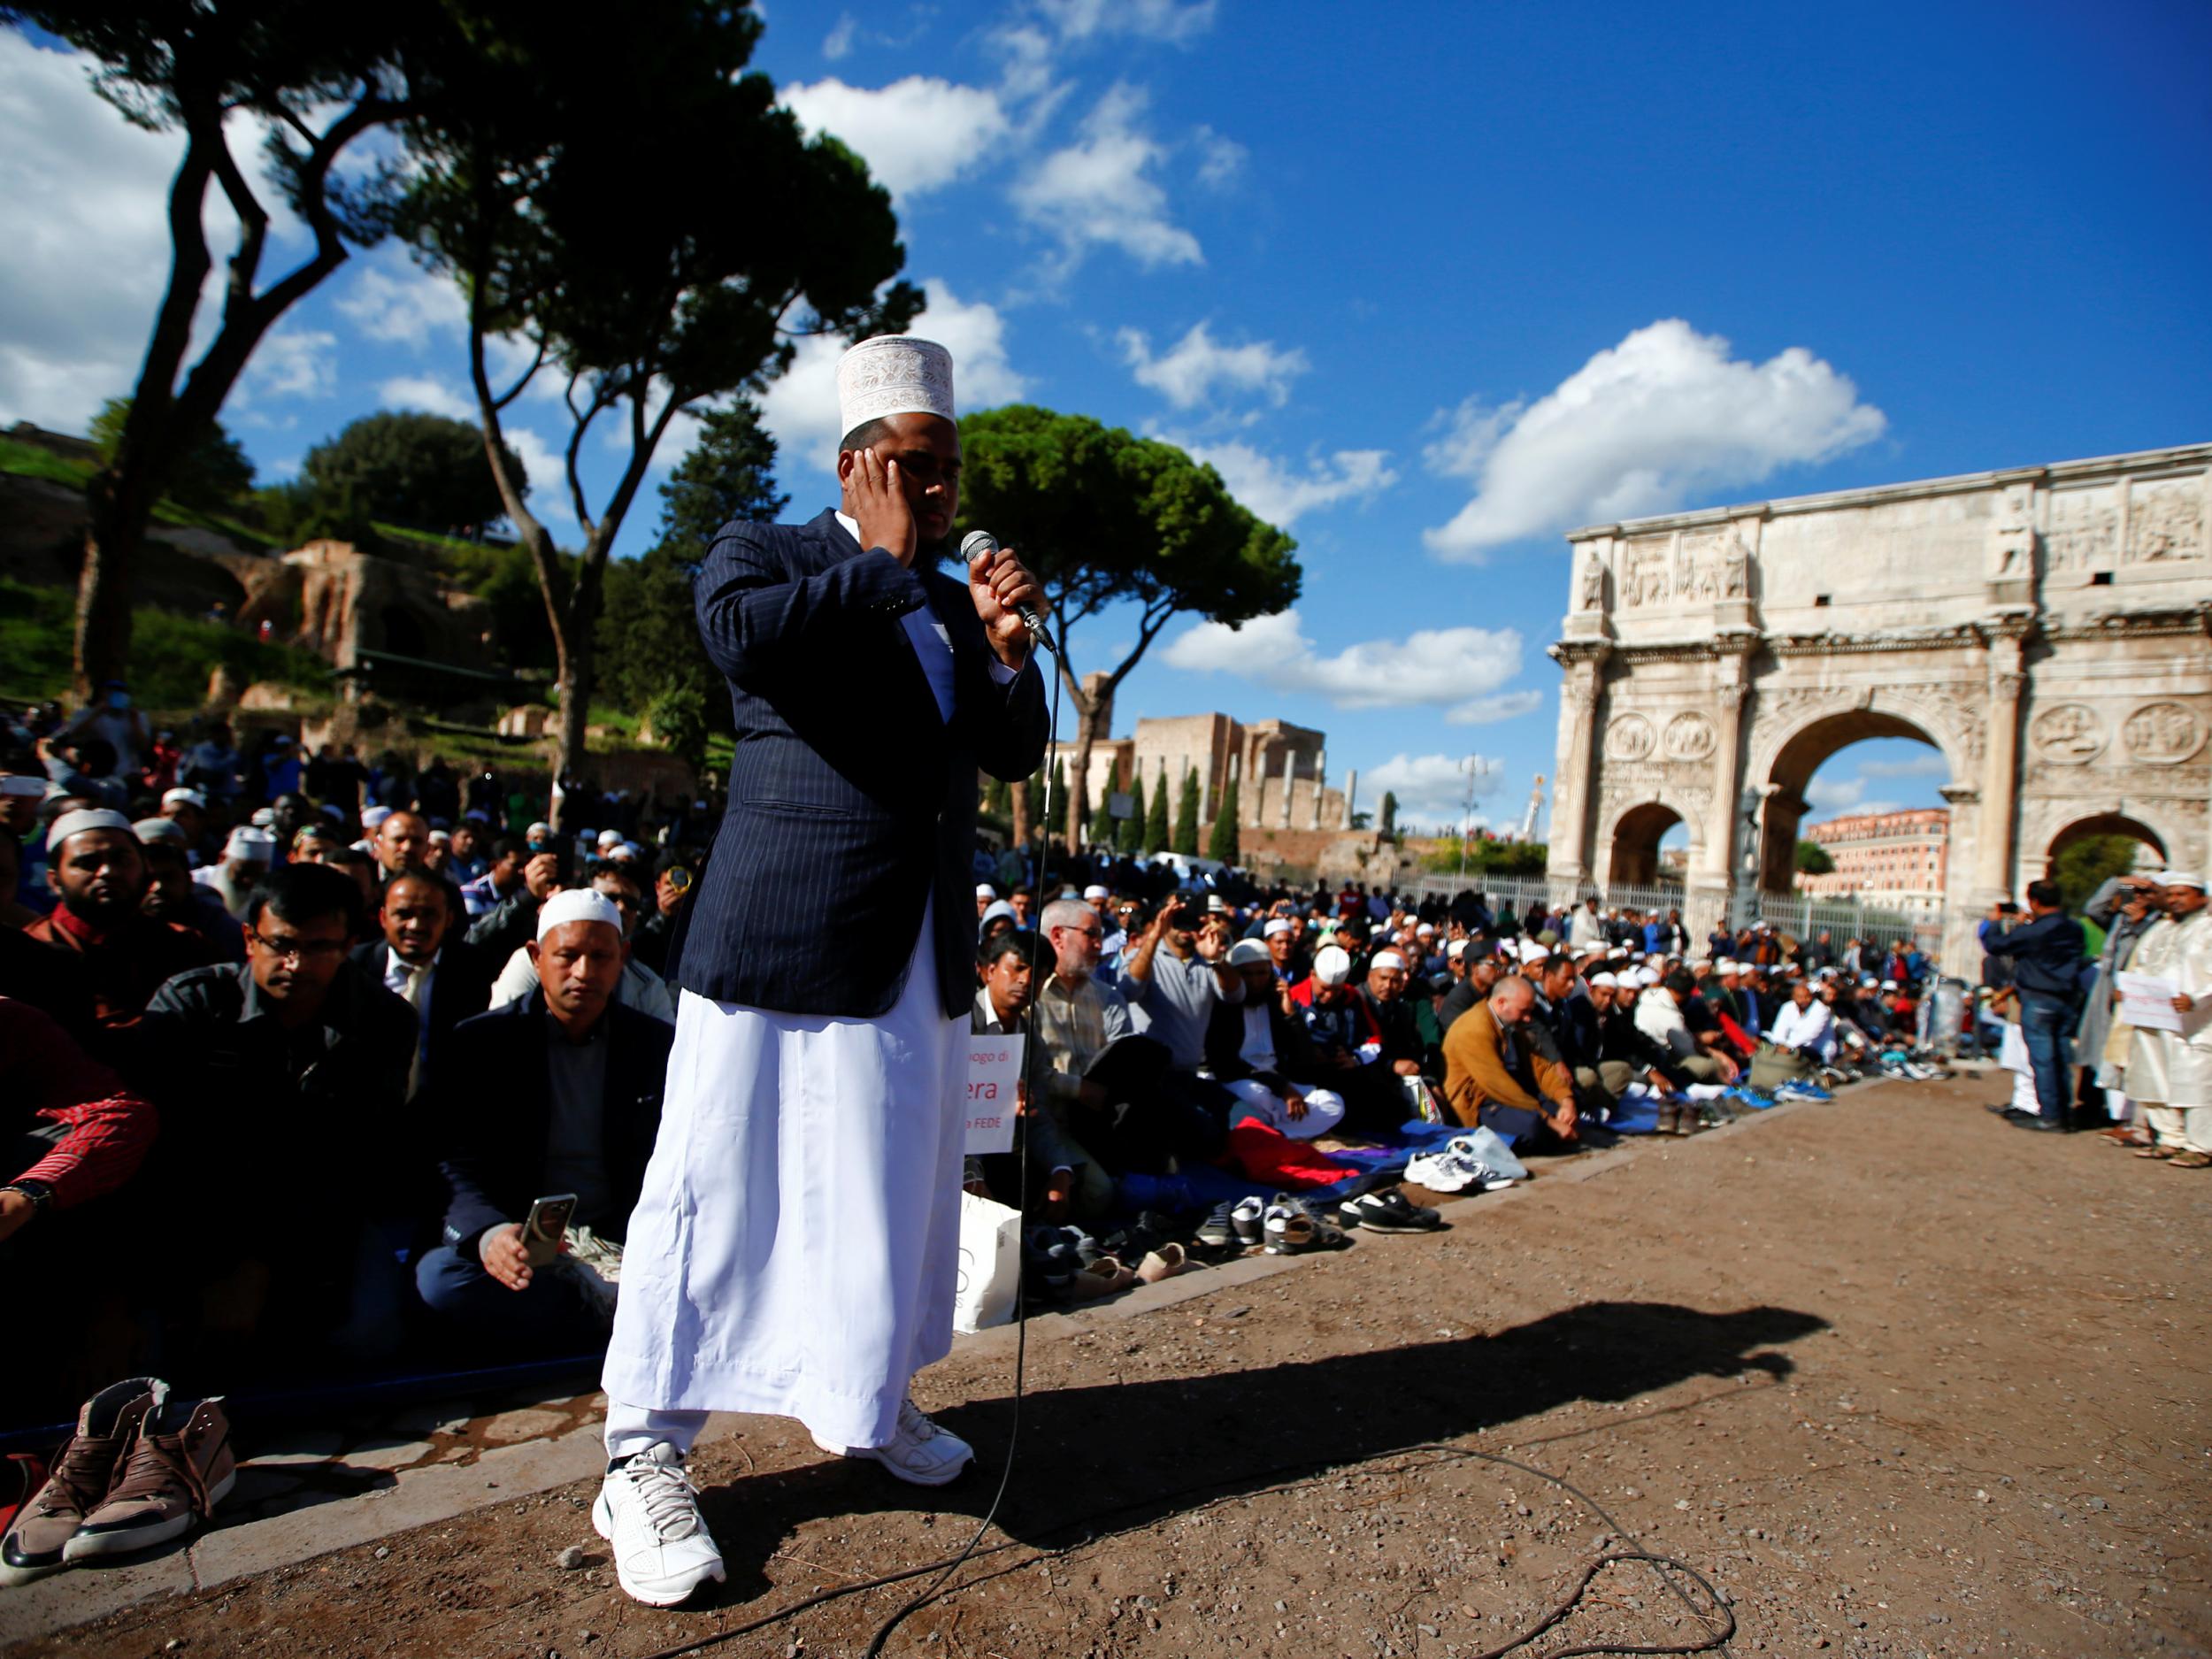 An estimated 1.6 million Muslims live in Italy, yet there are only eight official mosques